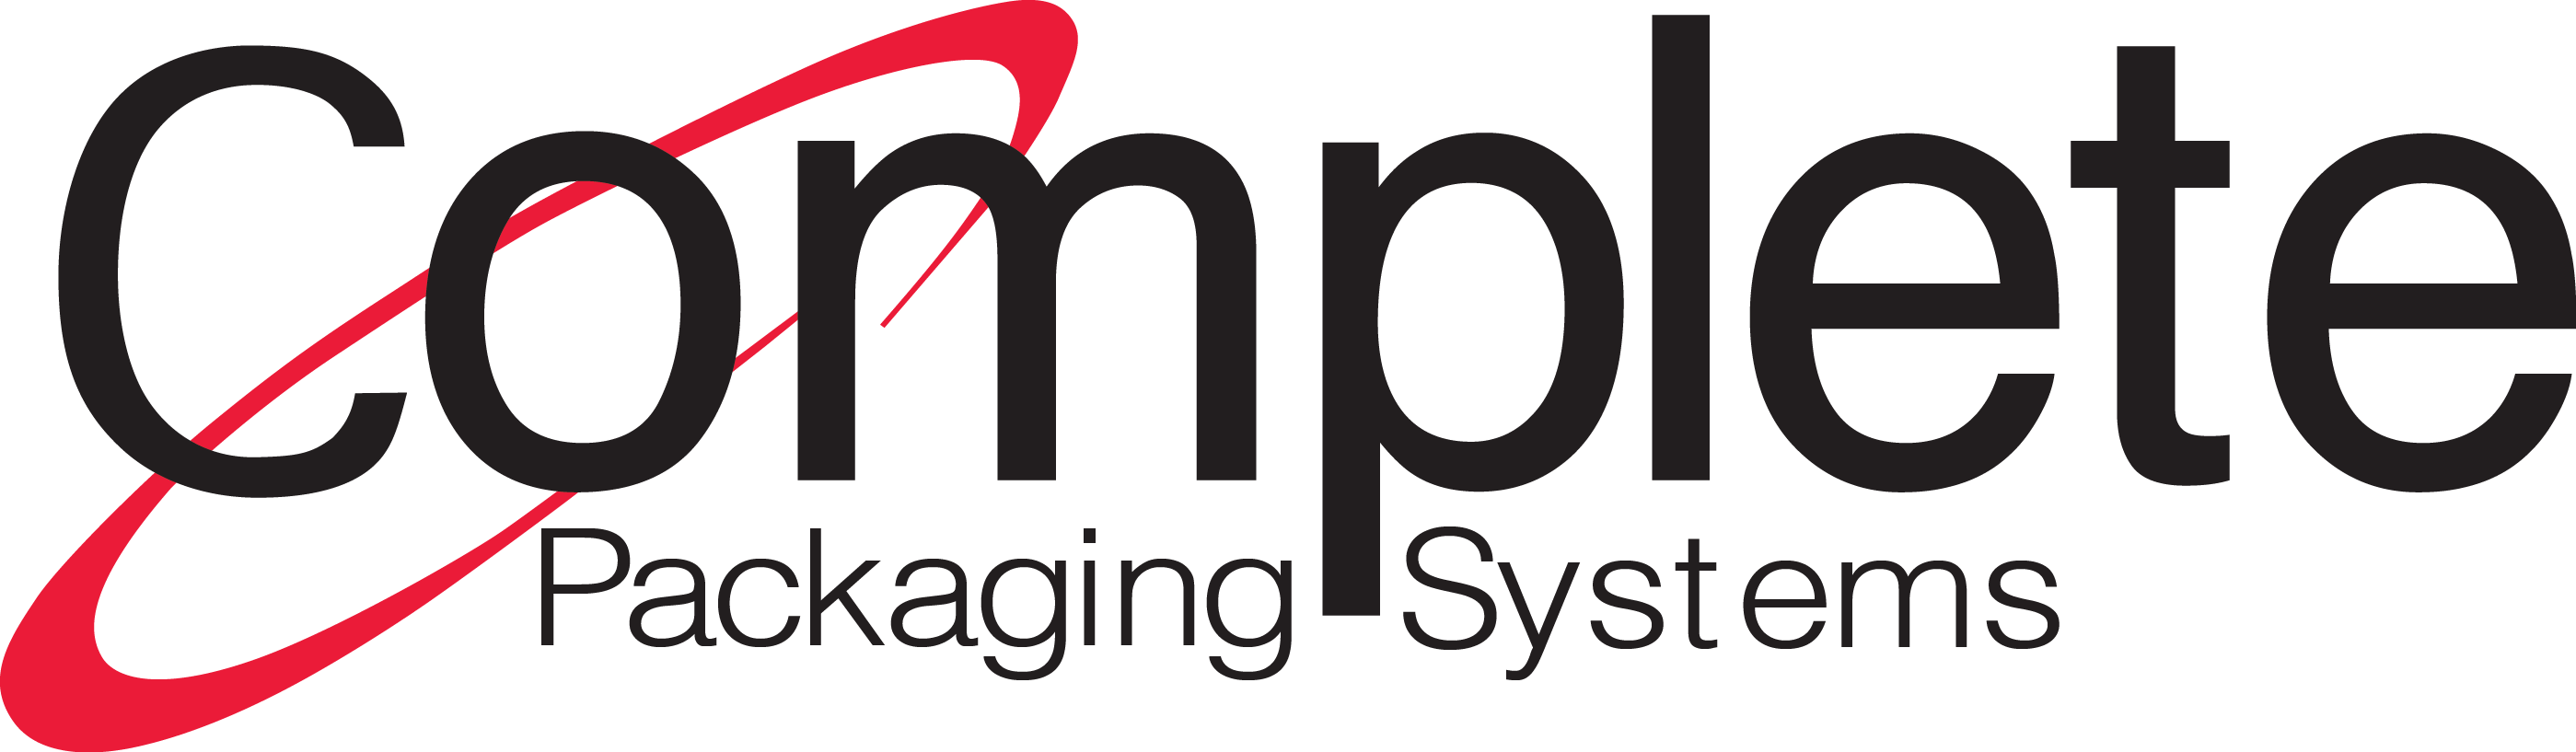 Complete Packaging Systems Inc.